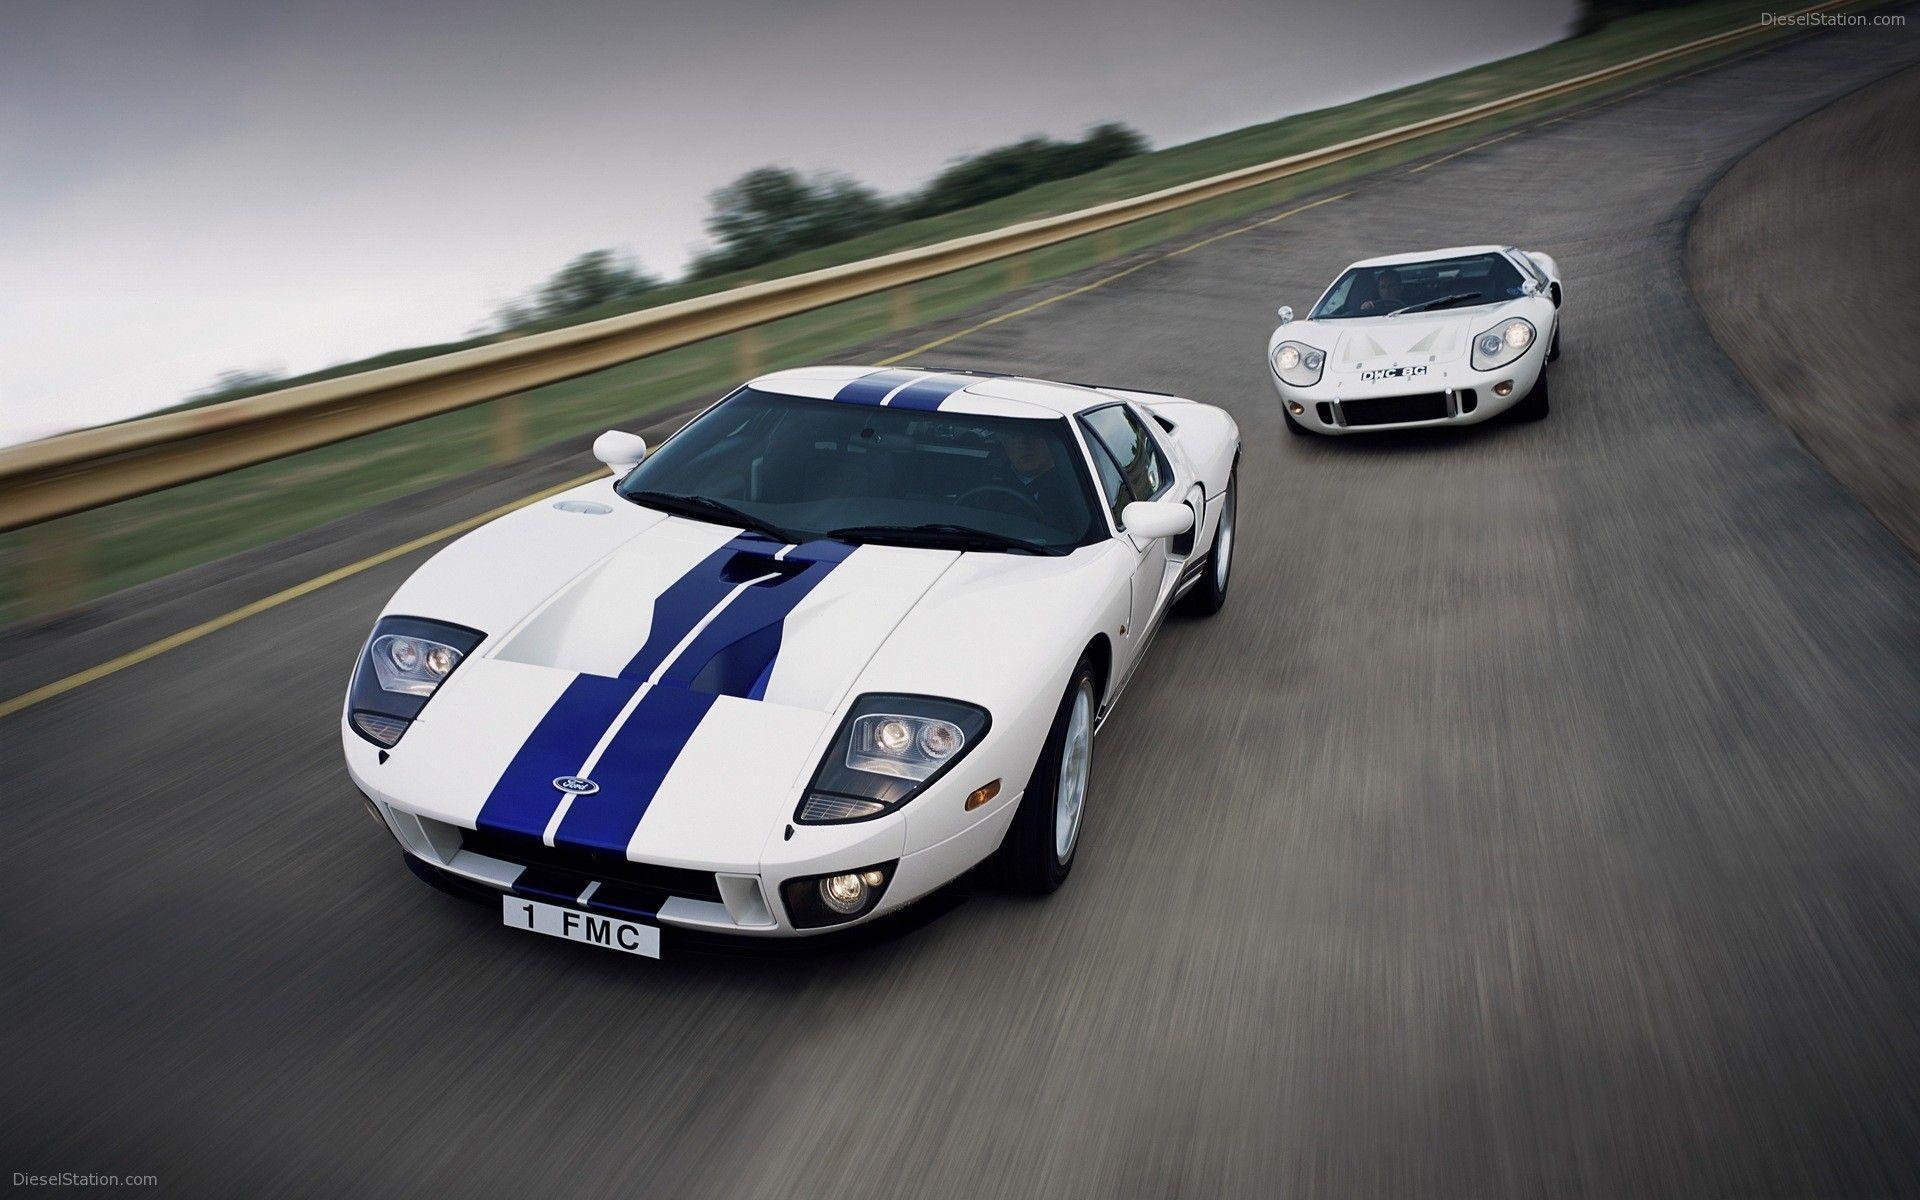 Wallpapers For > Ford Gt40 Wallpapers